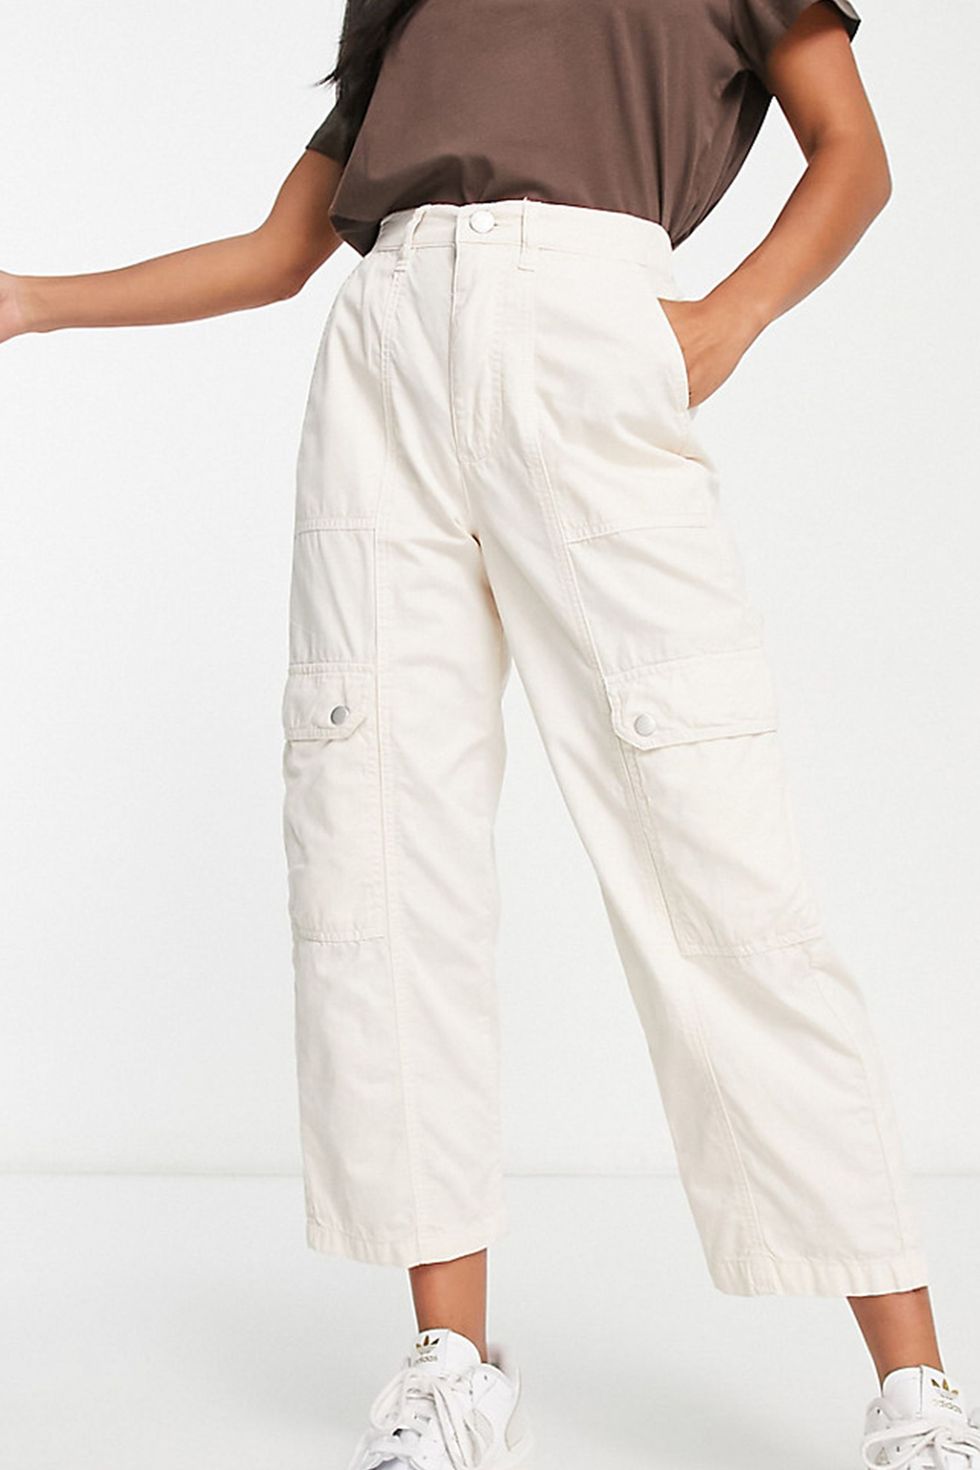 Stylish and Comfortable Women's Cargo Pants with Loose Fit and Pockets 